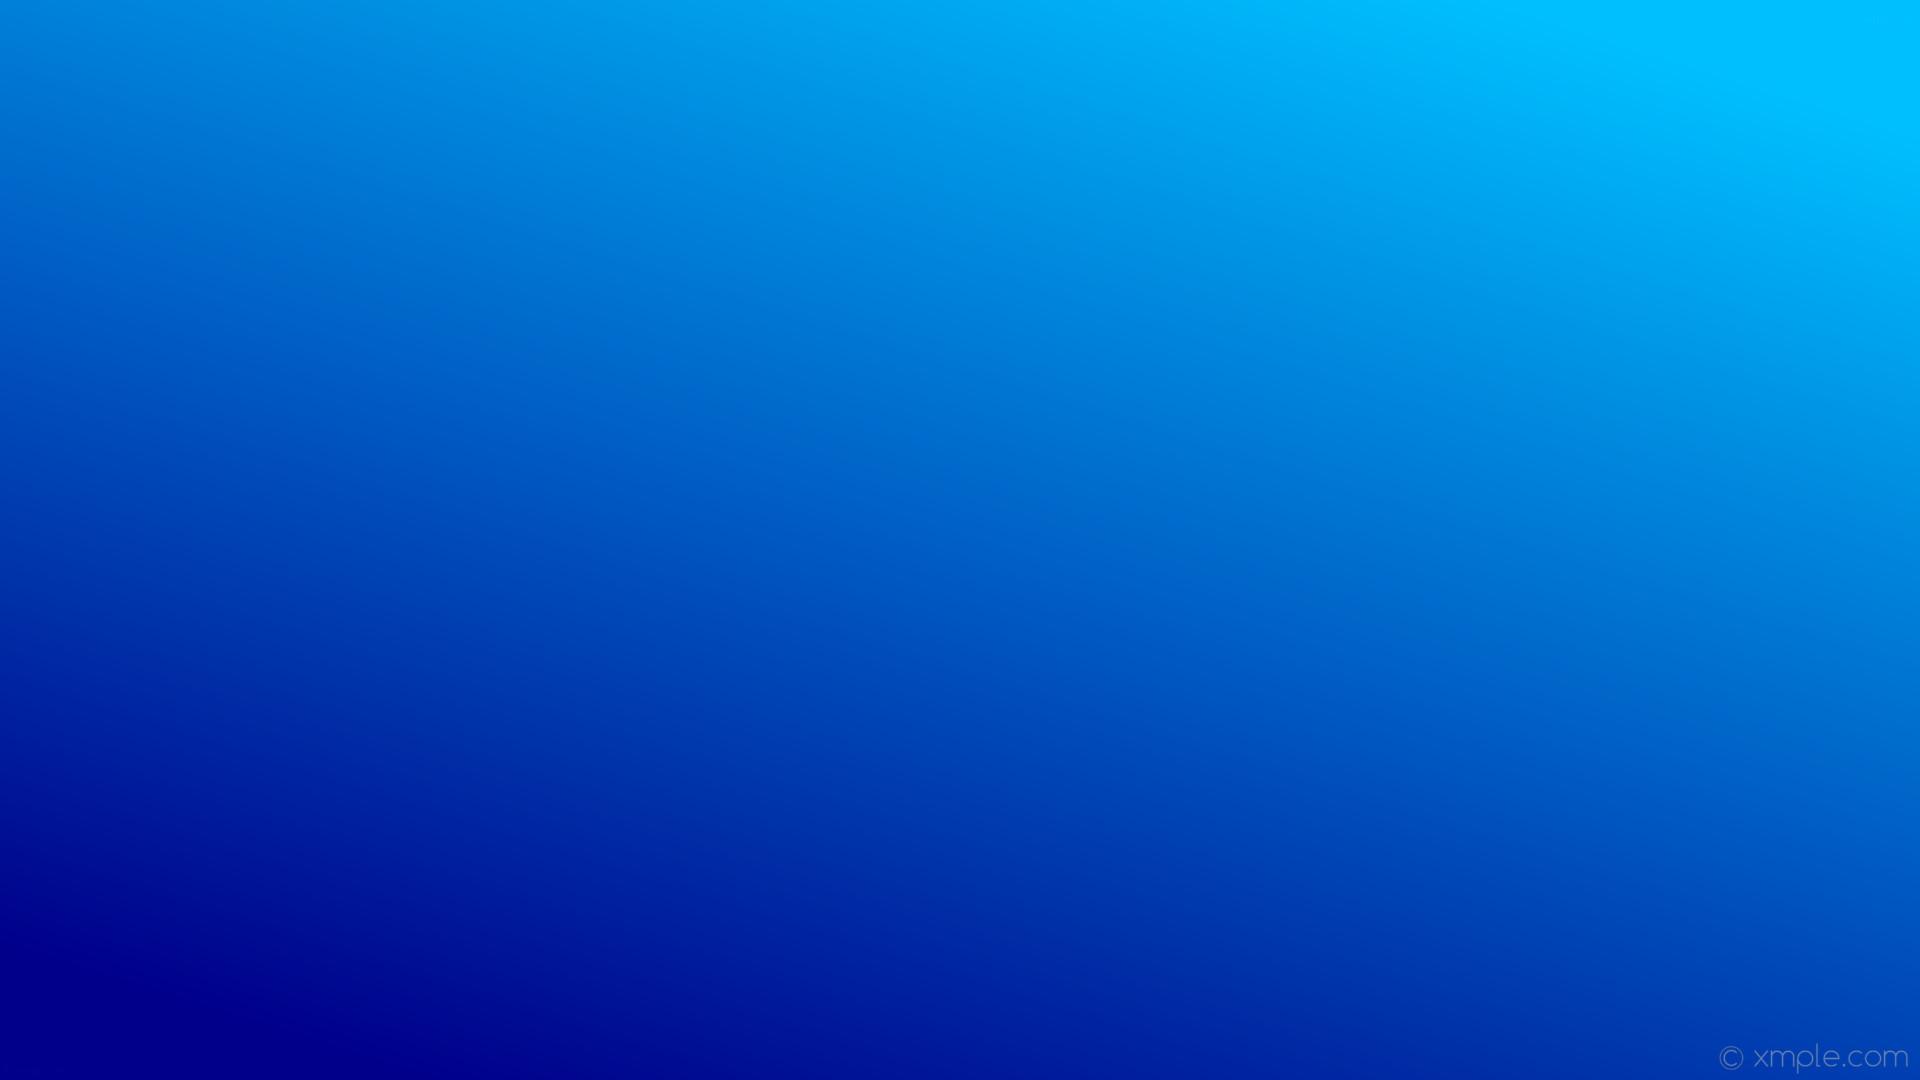 Dark Blue Fading To Light Blue Wallpapers Wallpaper Cave